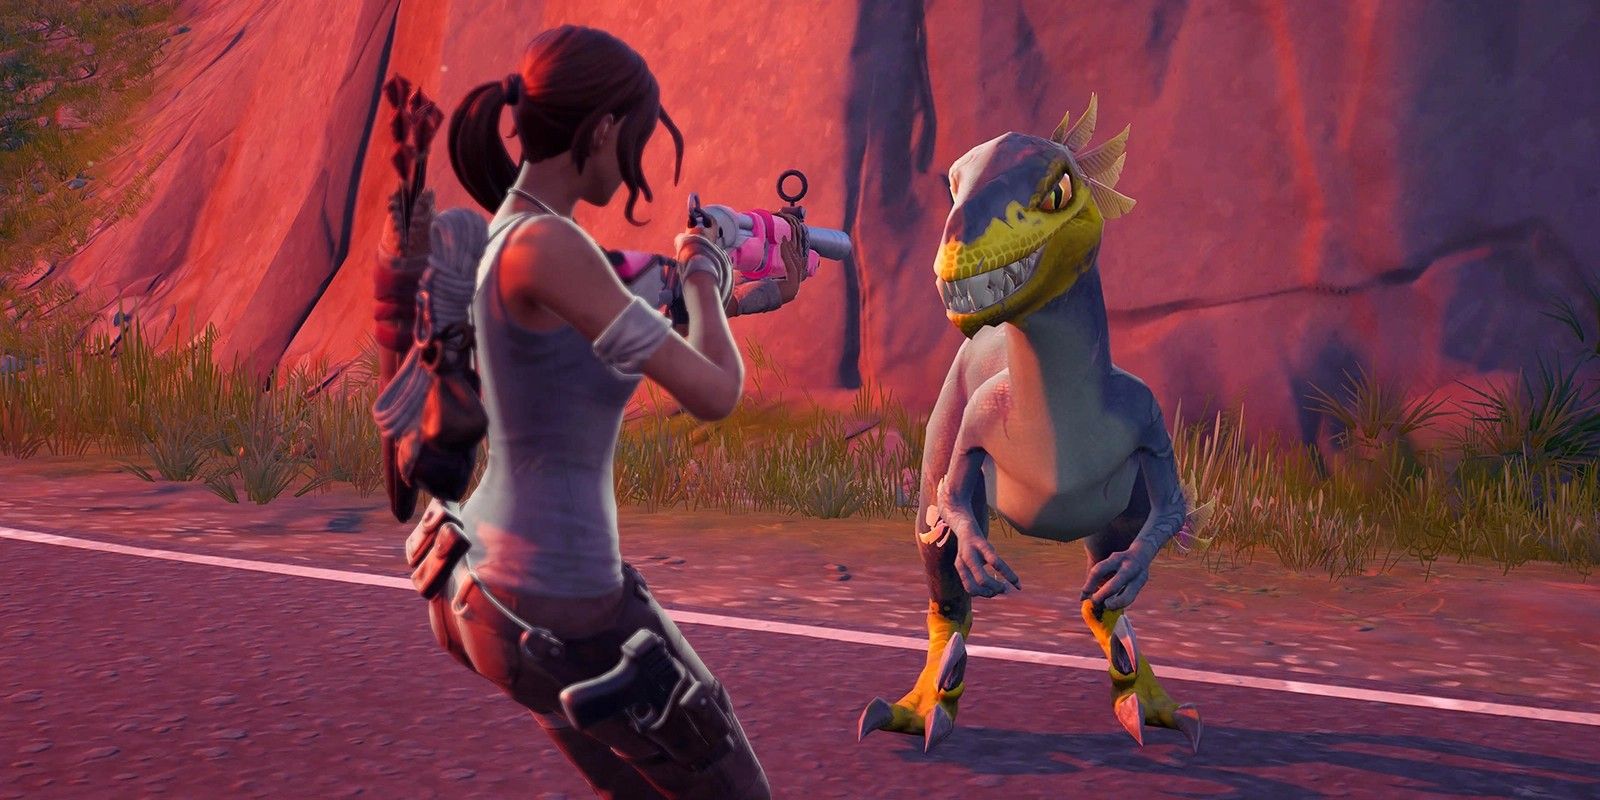 A player faces a raptor from Fortnite Season 6